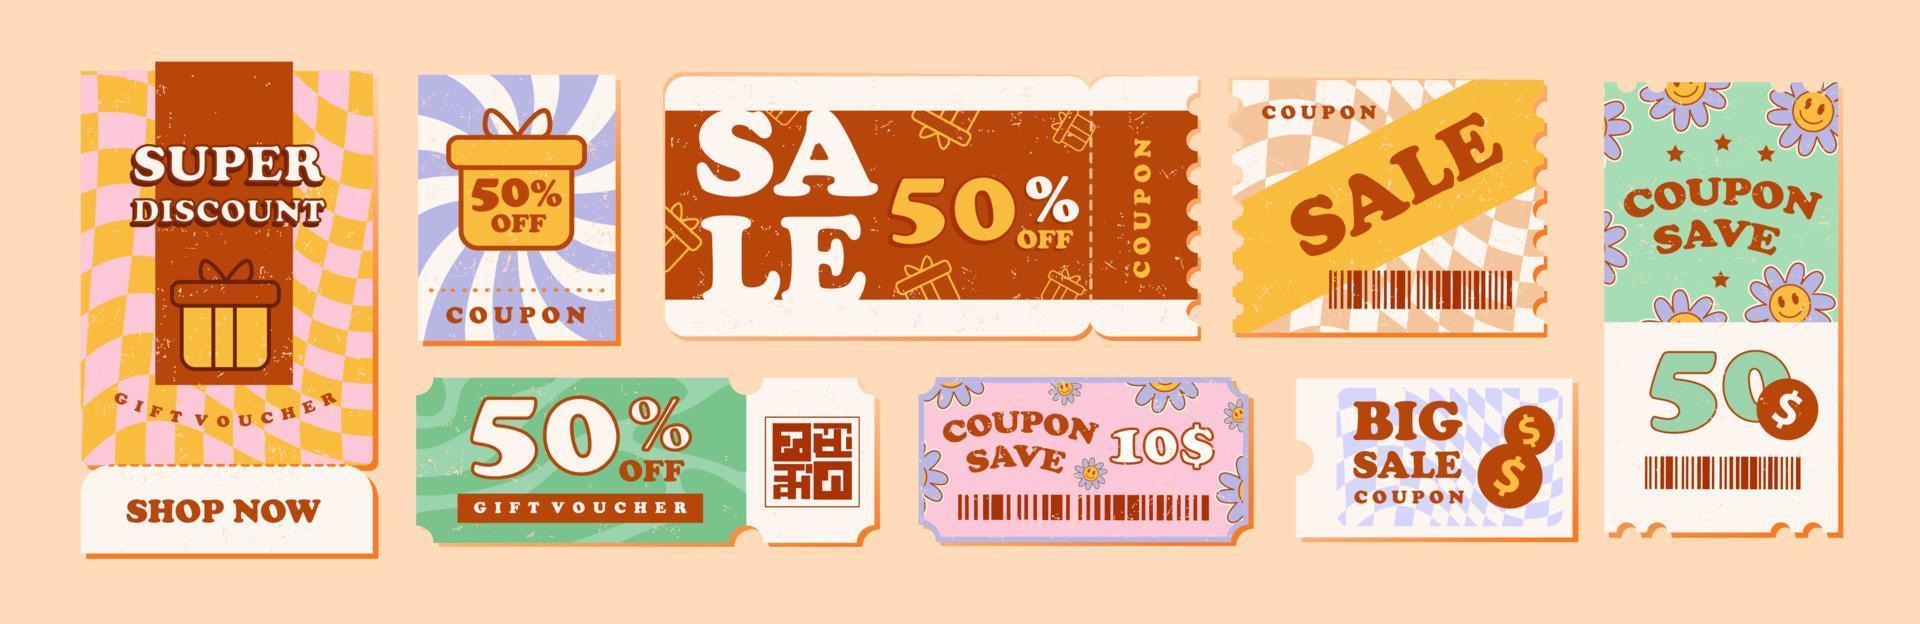 Discount coupons, tickets, gift vouchers in a retro groovy style. Vector template